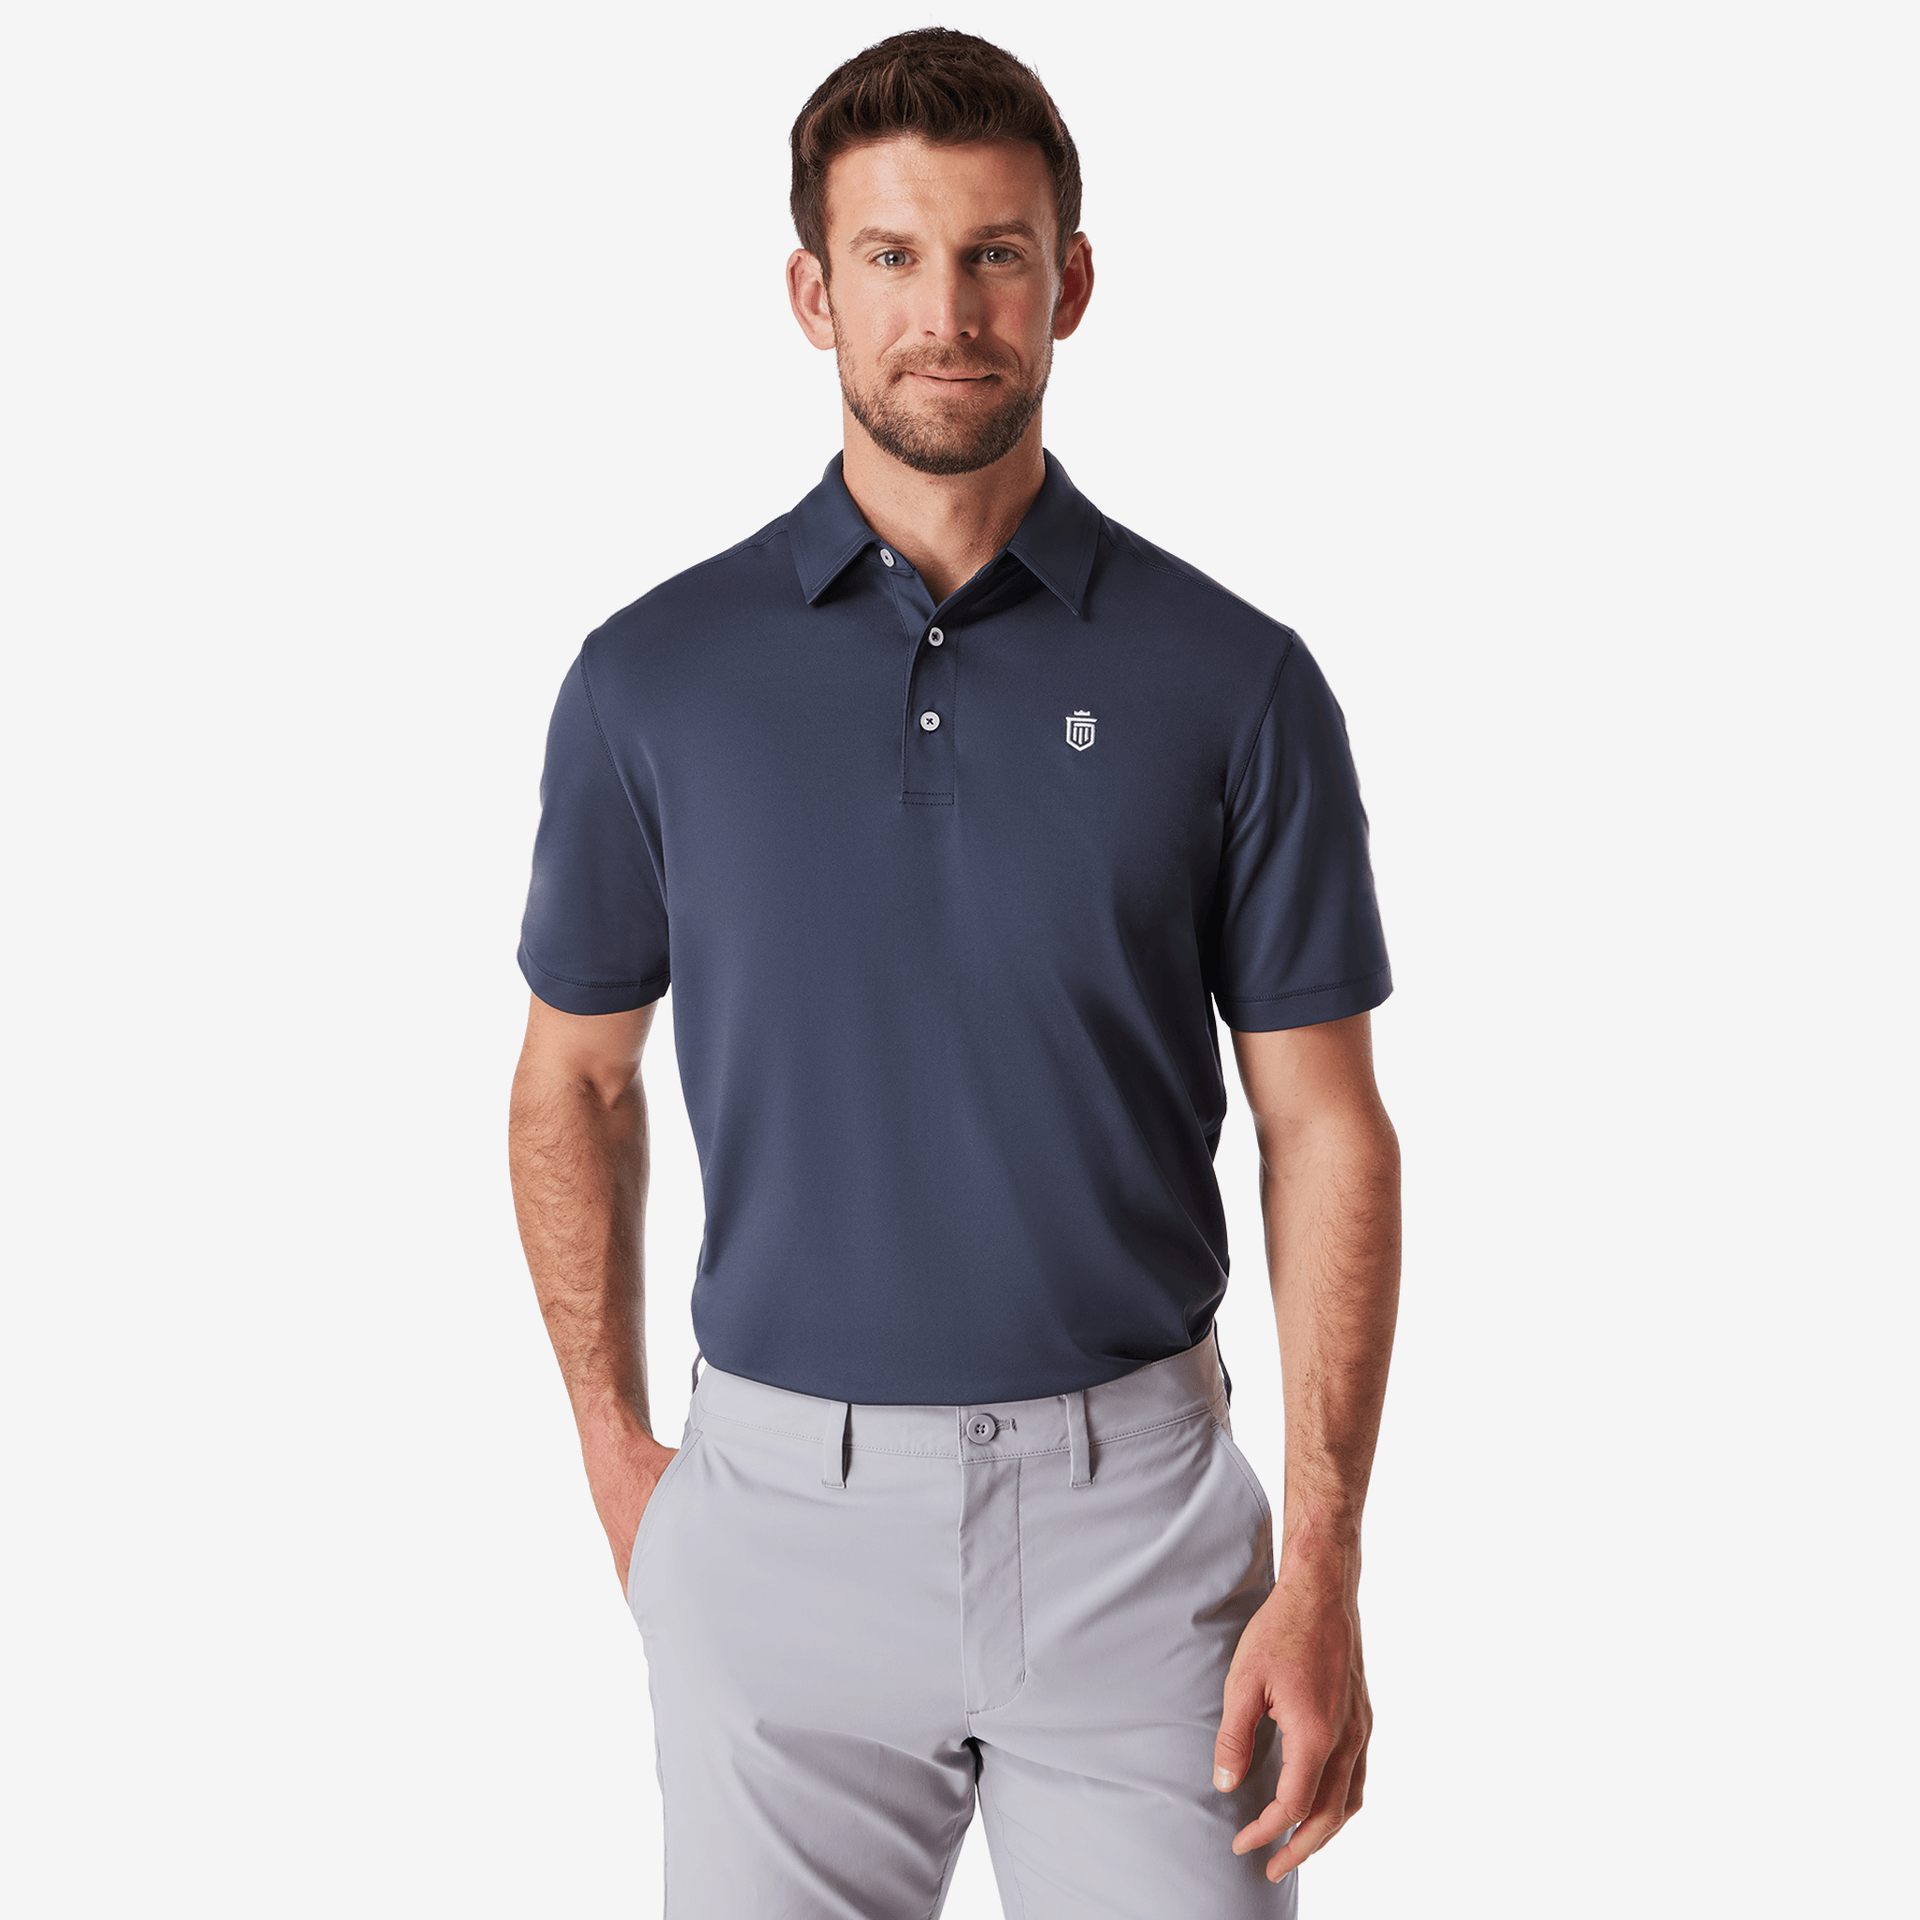 Athletic Tech Polo Navy – Greatness Wins